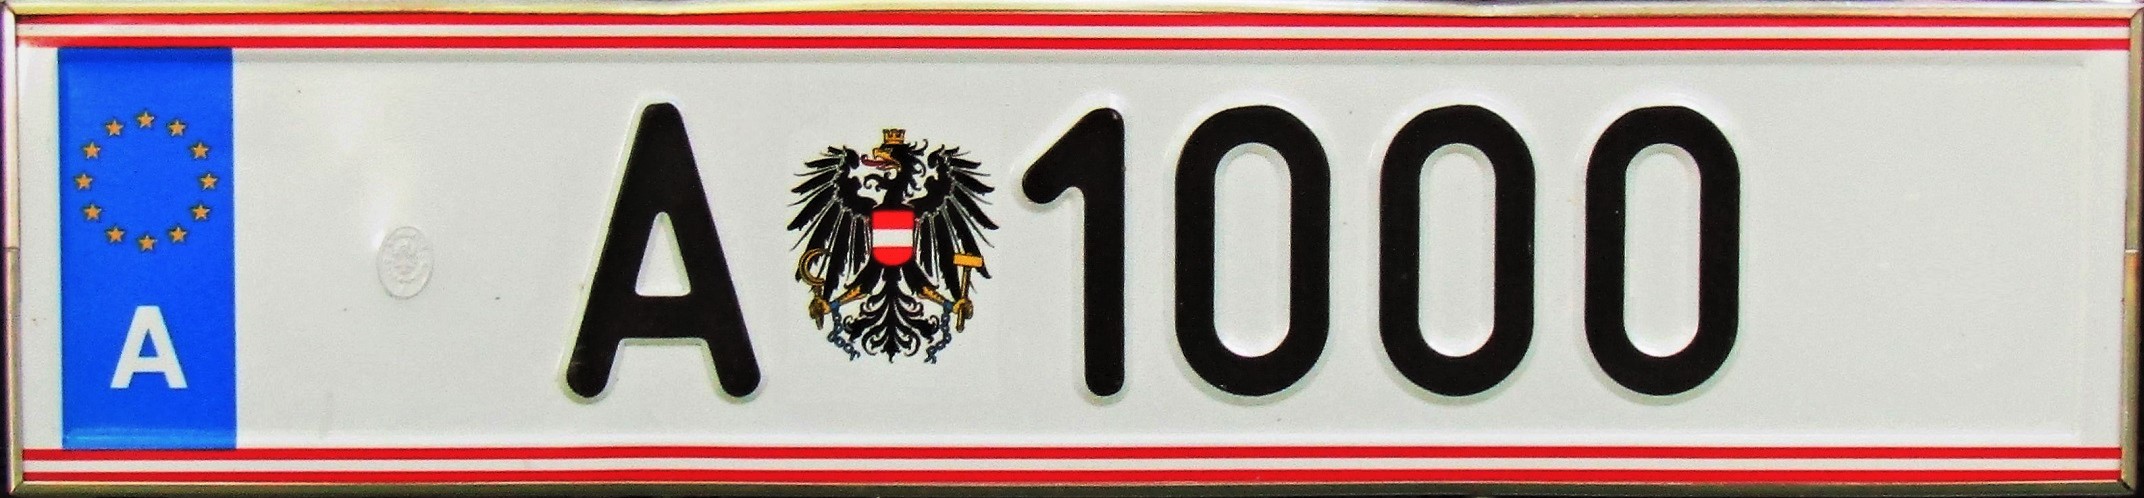 Datei:A 1000 - License plate of the president of Austria.jpg – Wikipedia